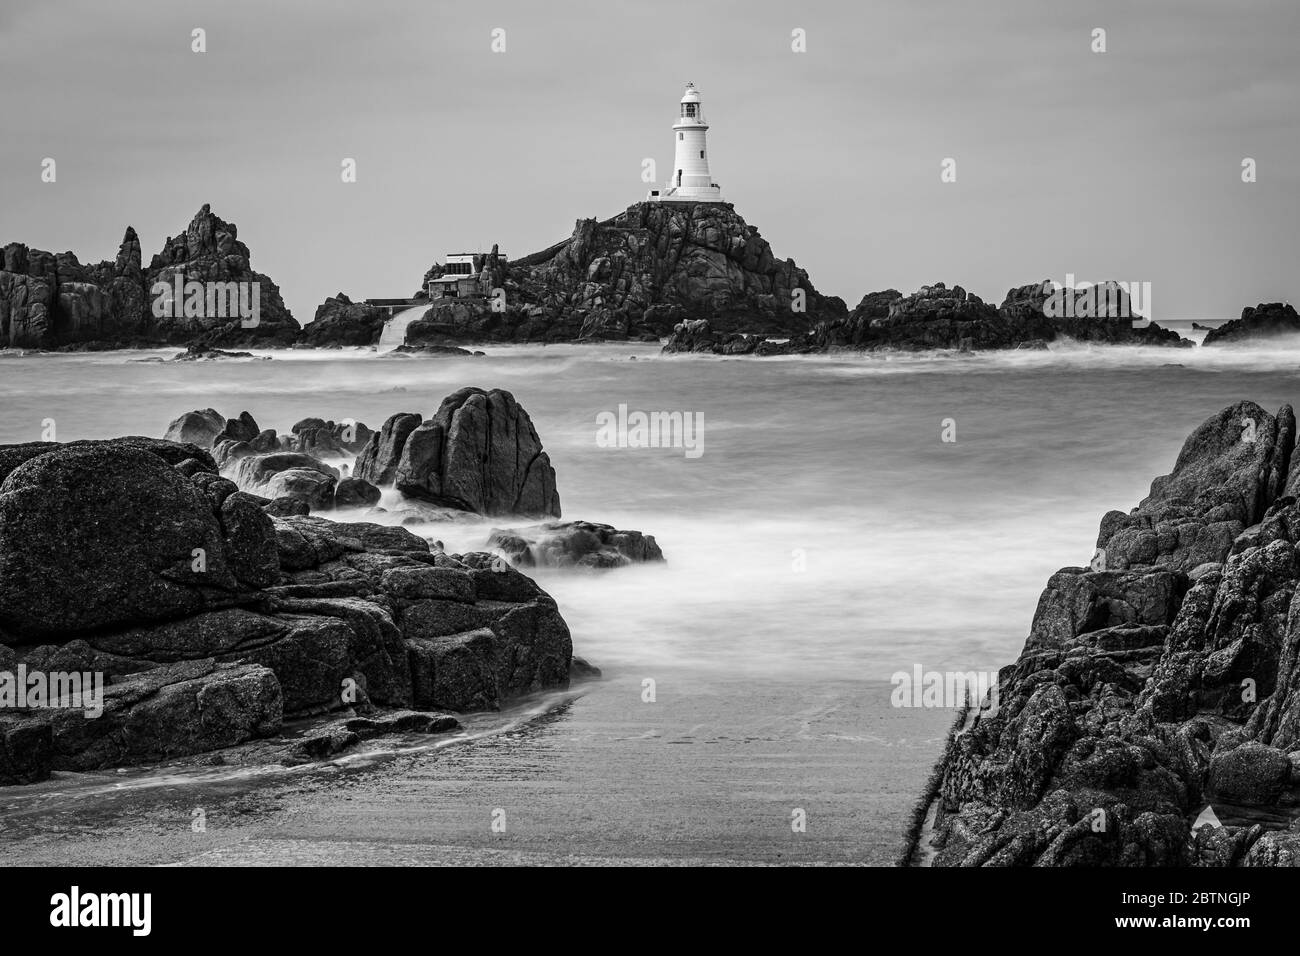 High tide covers the causeway leading to La Corbiere lighthouse, Jersey, Channel Islands, UK Stock Photo